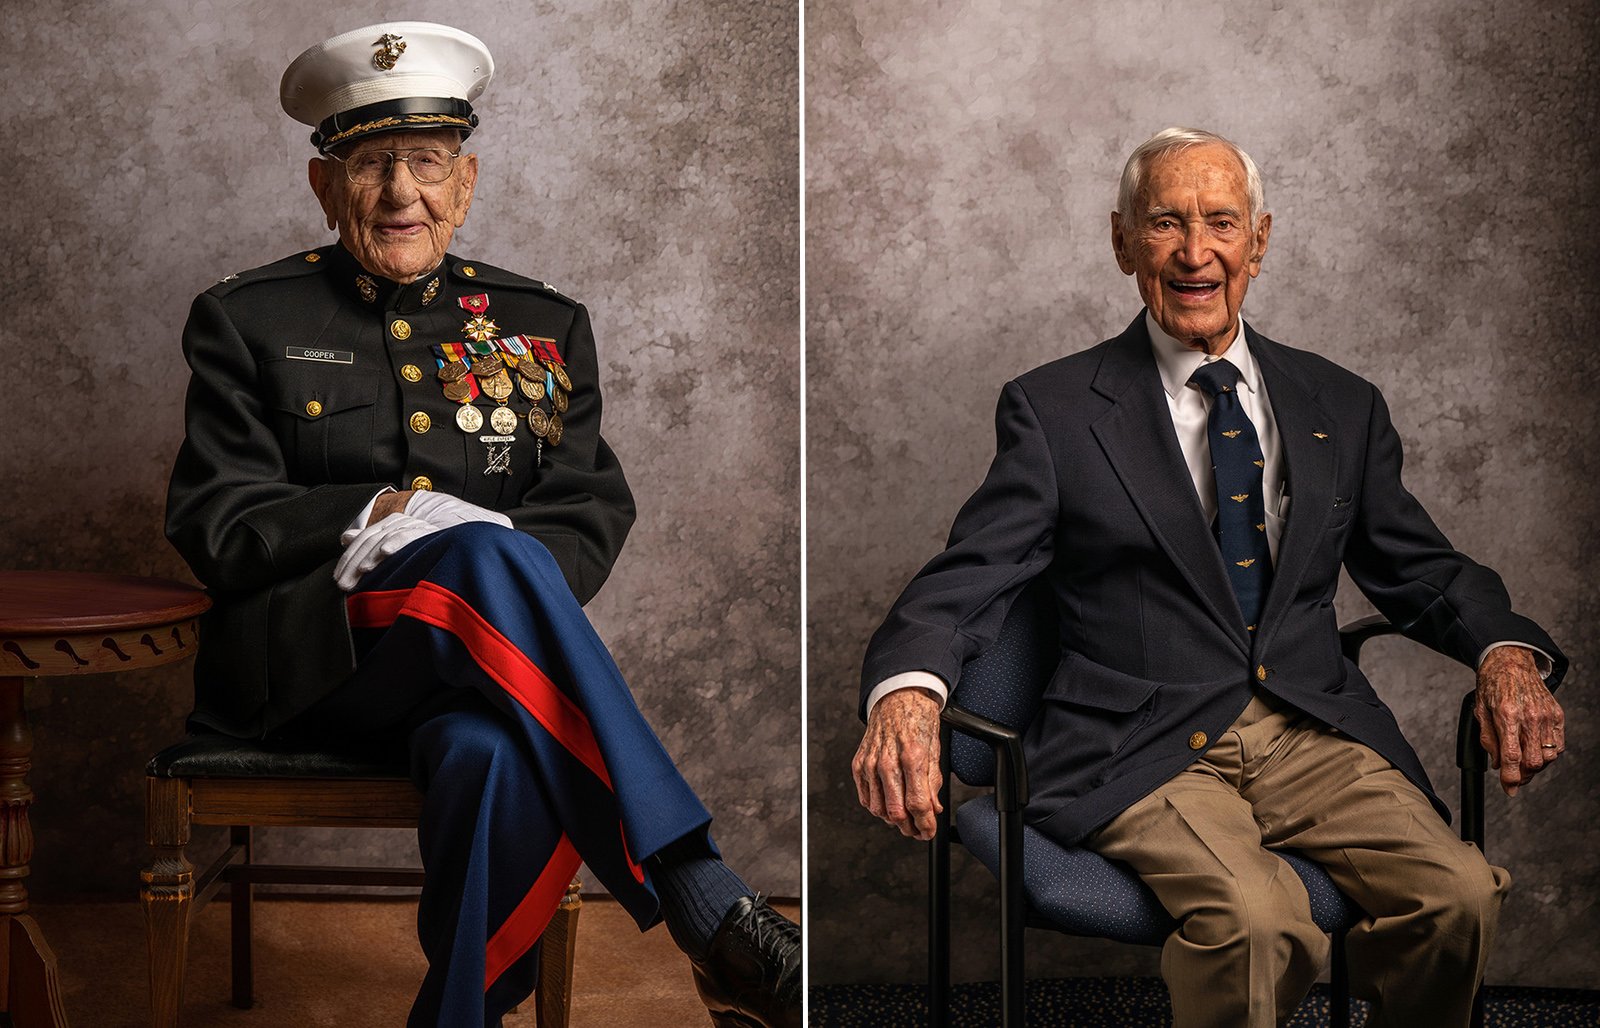 Portraits of Honor: Photographing the Last of the WWII Veterans